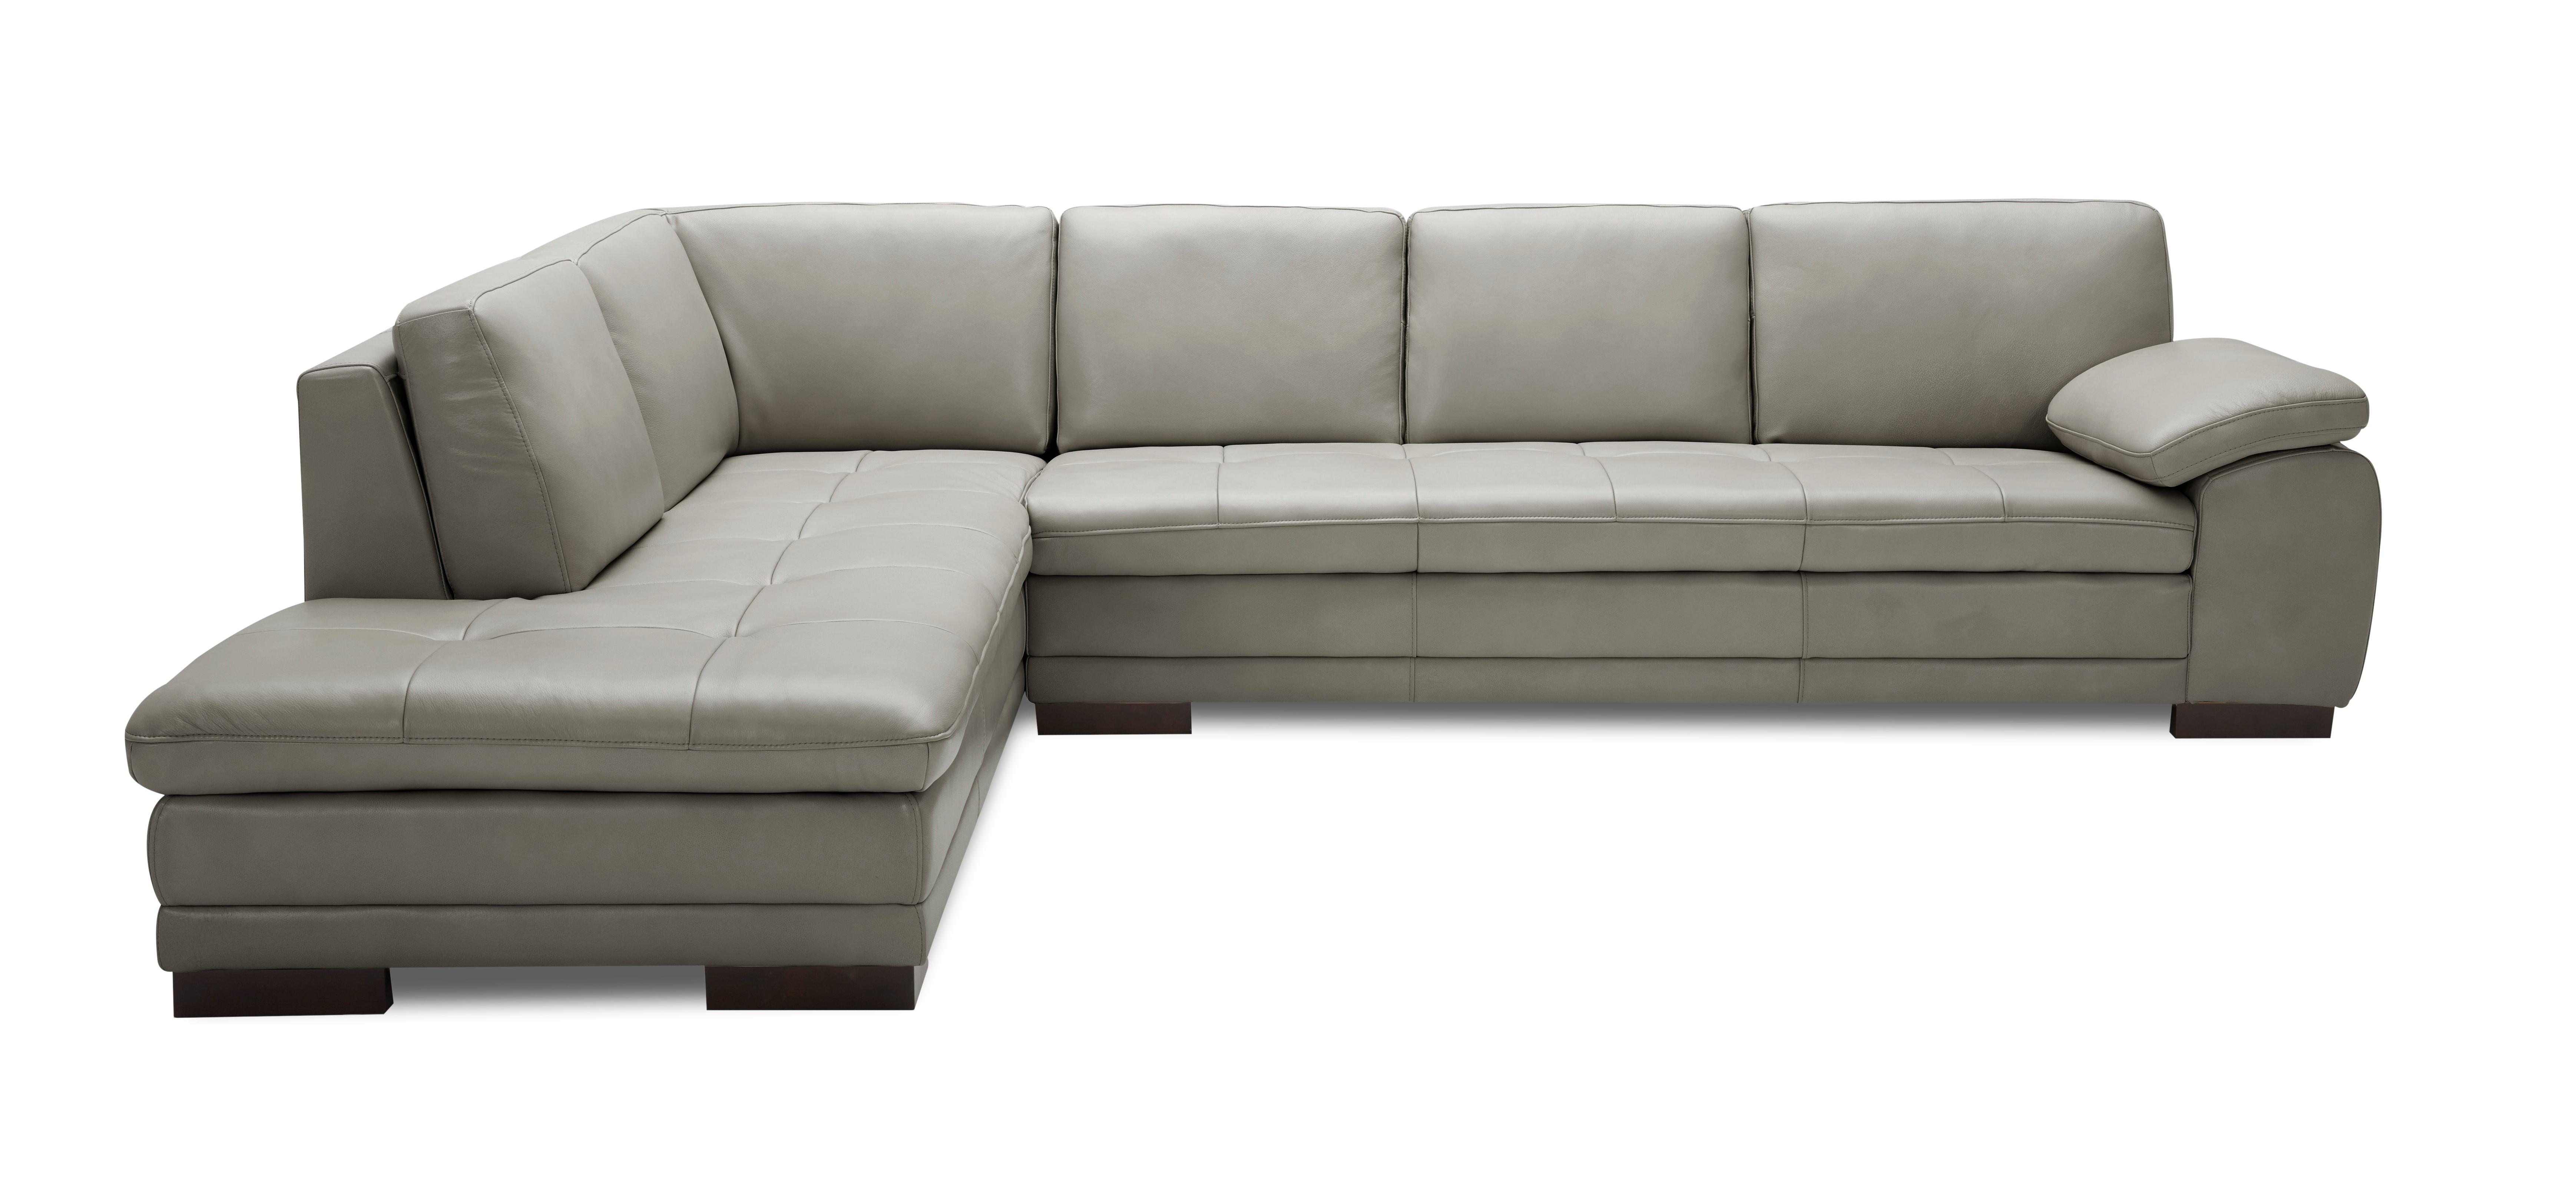 Modern Sectional Sofa 625 SKU1754431131 in Gray Leather